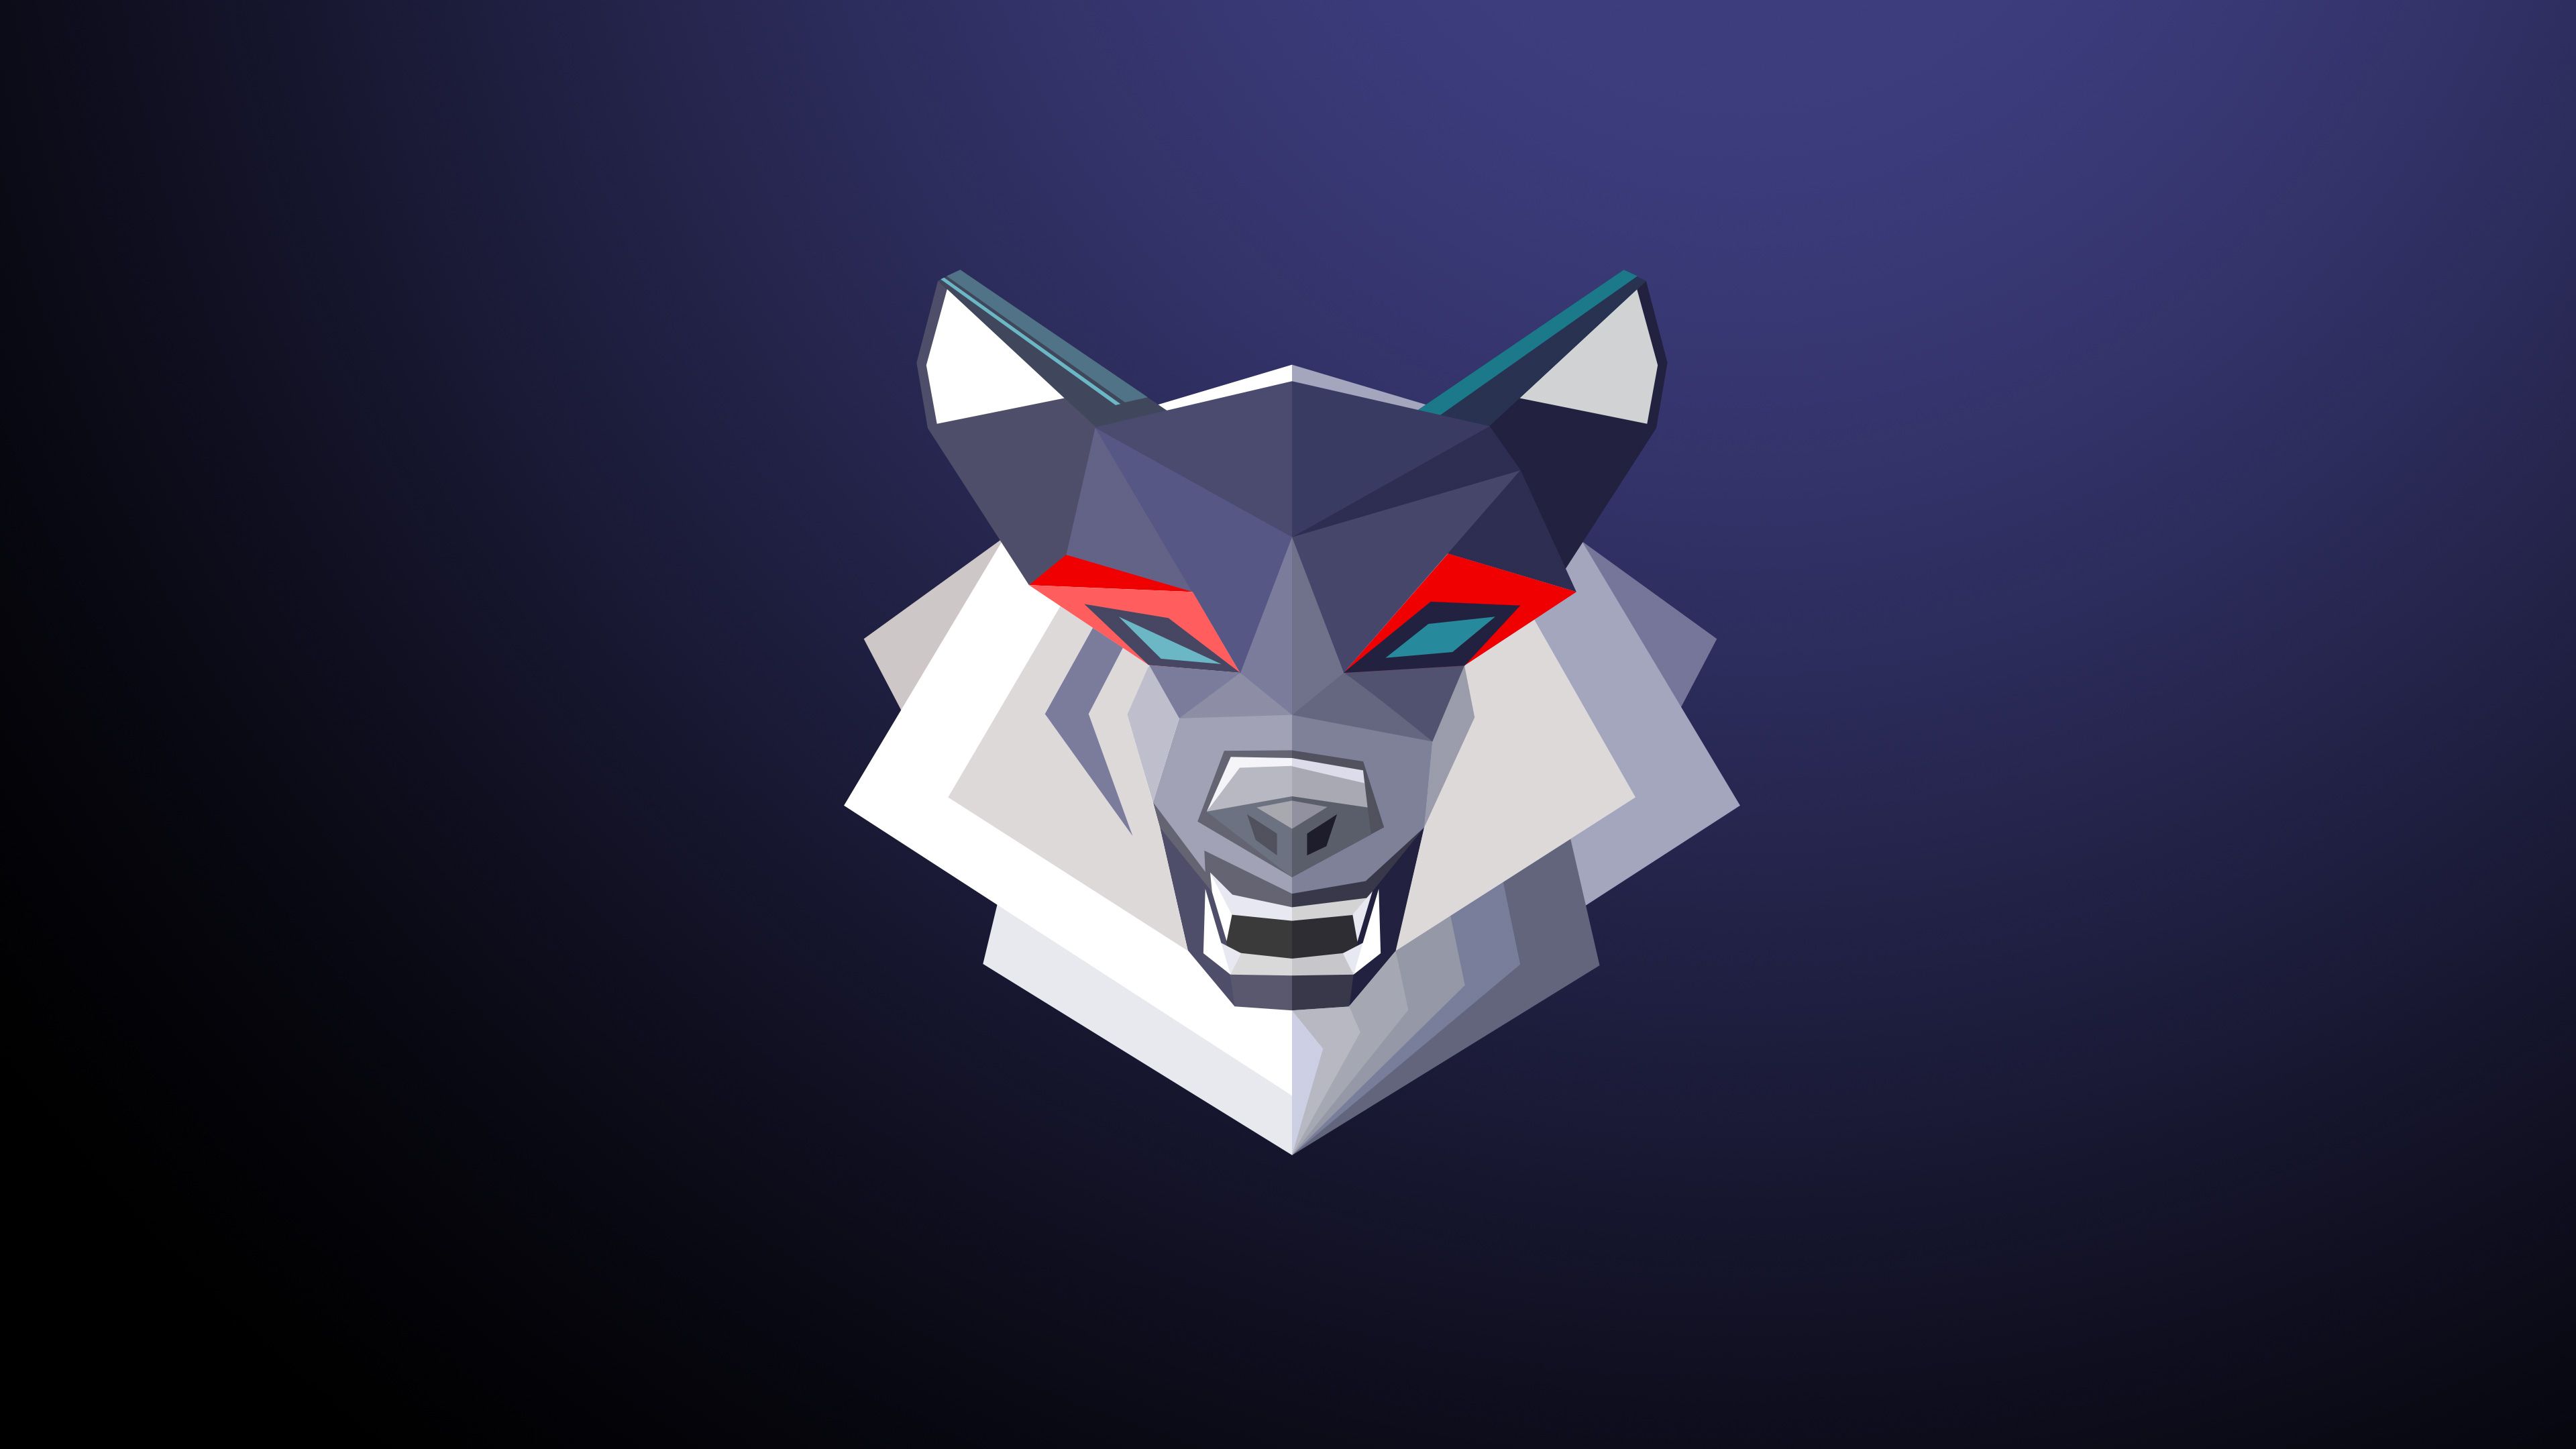 Wolf Minimalism 4k, HD Artist, 4k Wallpaper, Image, Background, Photo and Picture